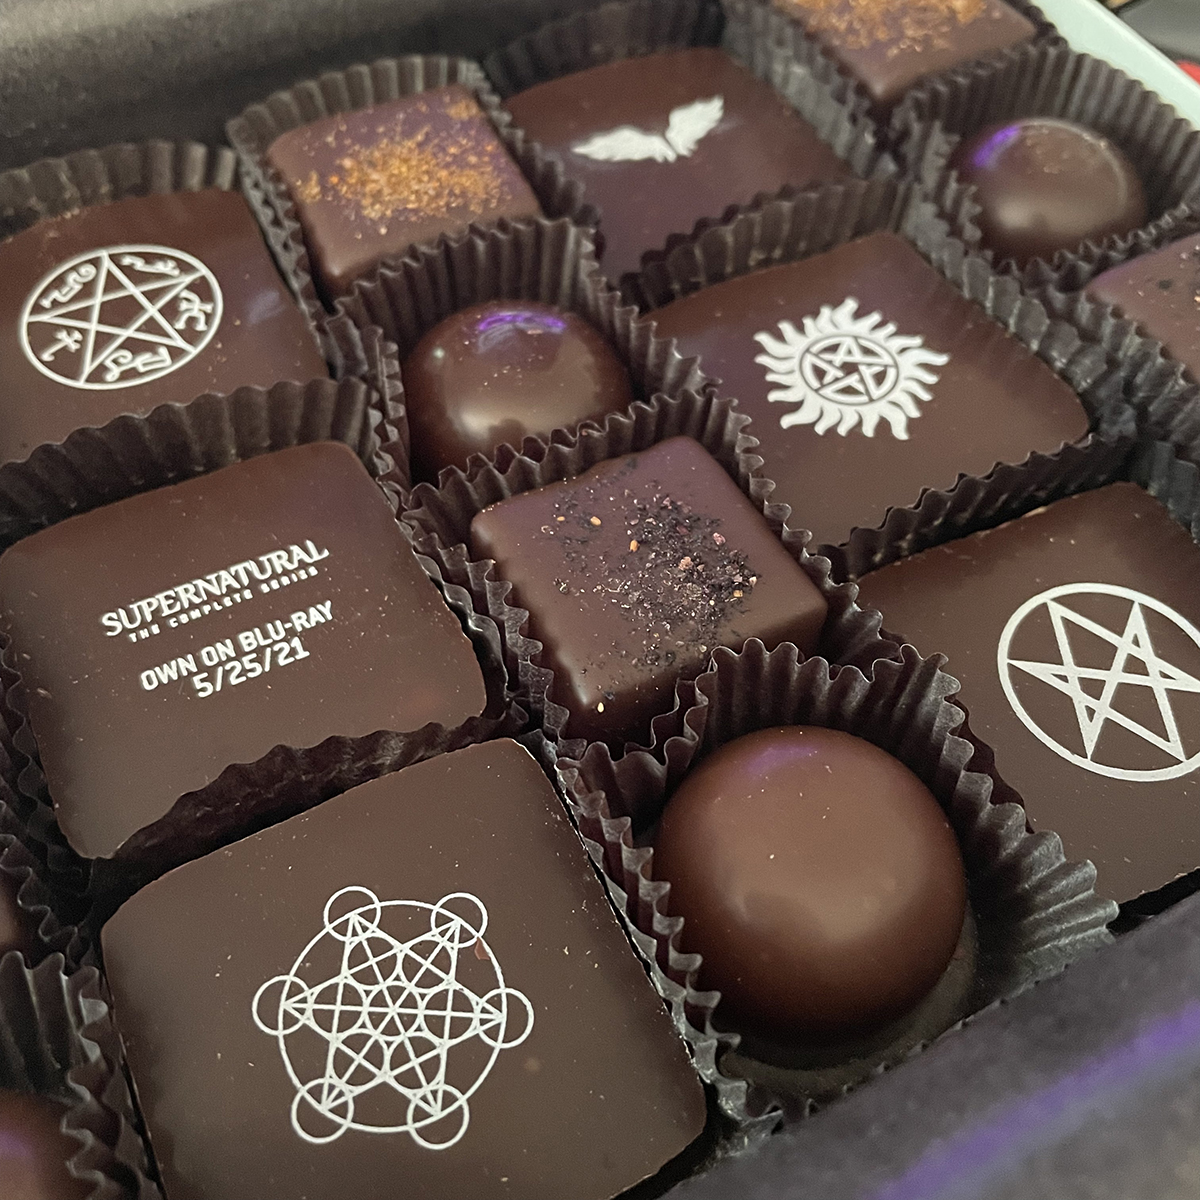 'Supernatural' Themed Chocolates - Handcrafted by Valerie Confections